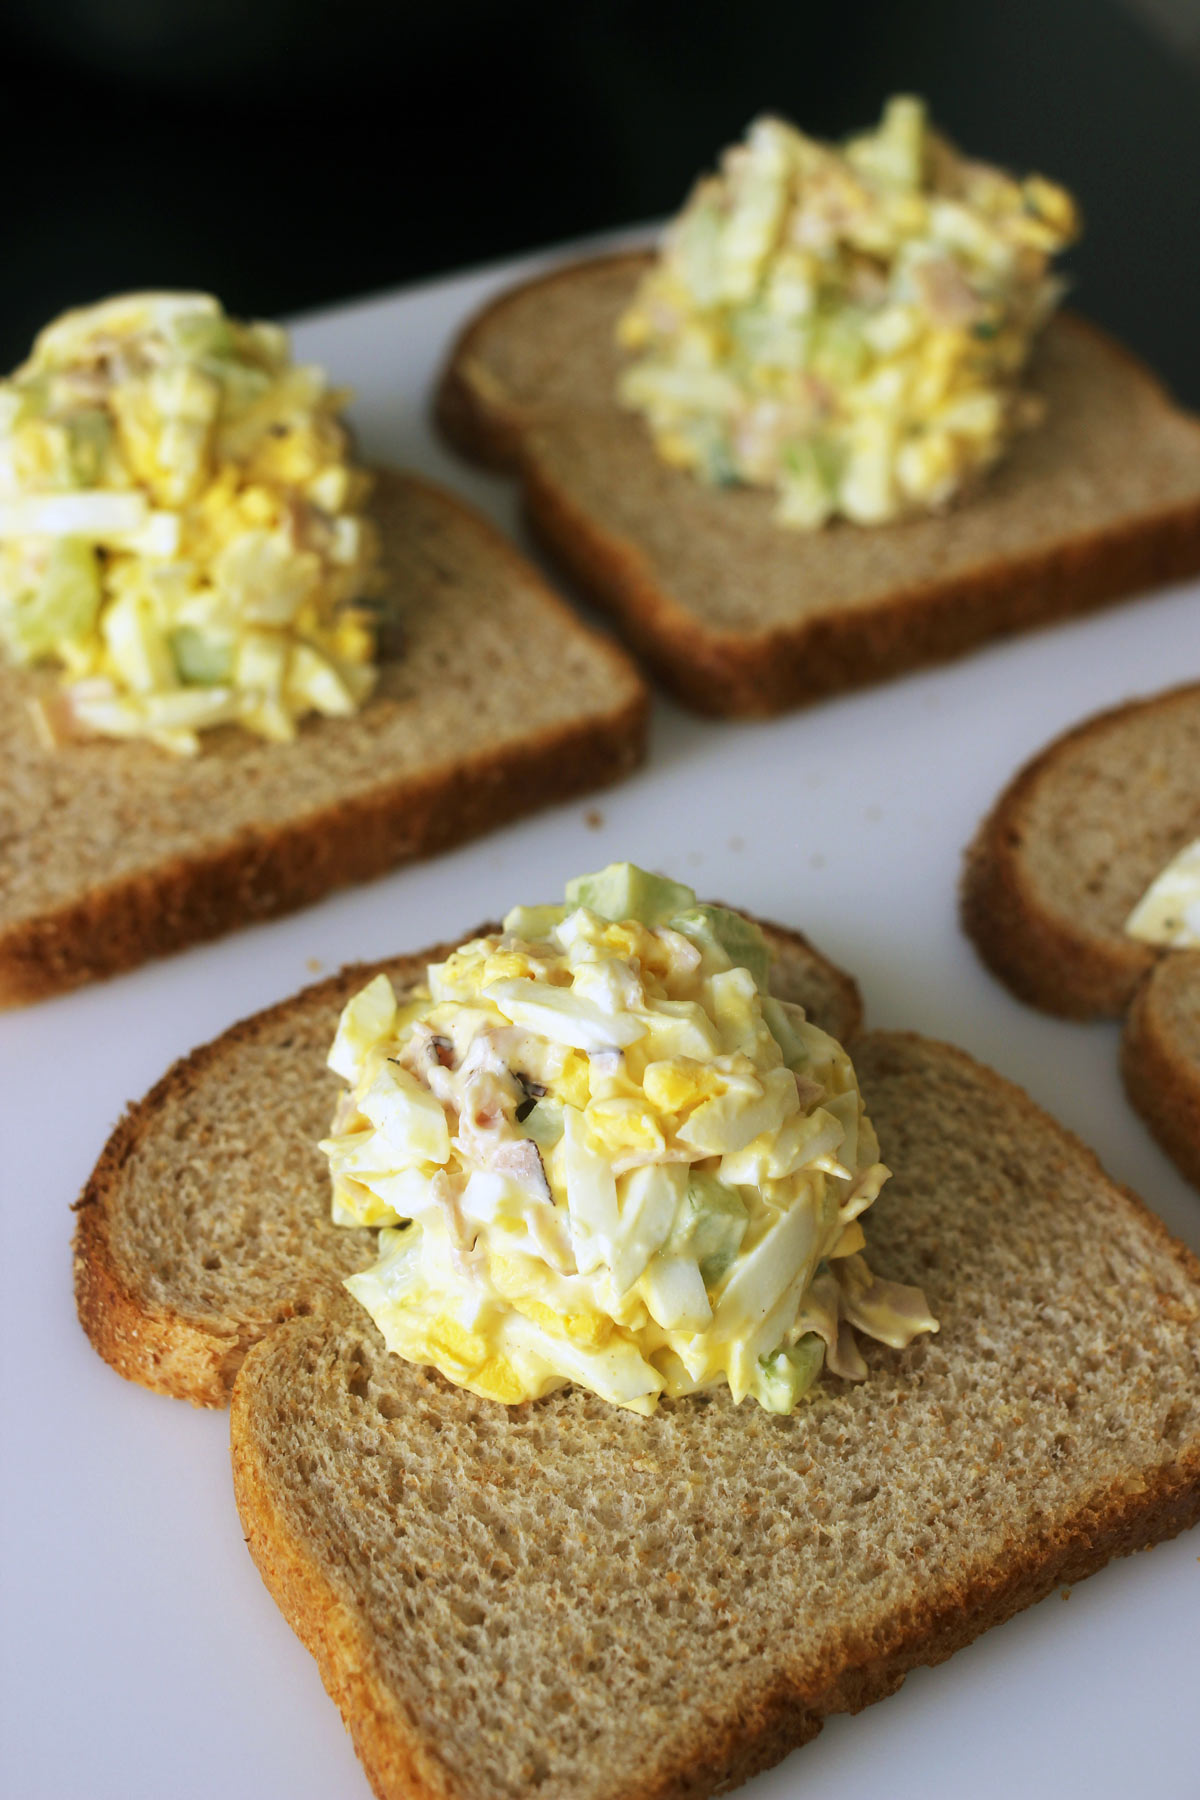 mounds of egg salad on slices of bread to make sandwiches